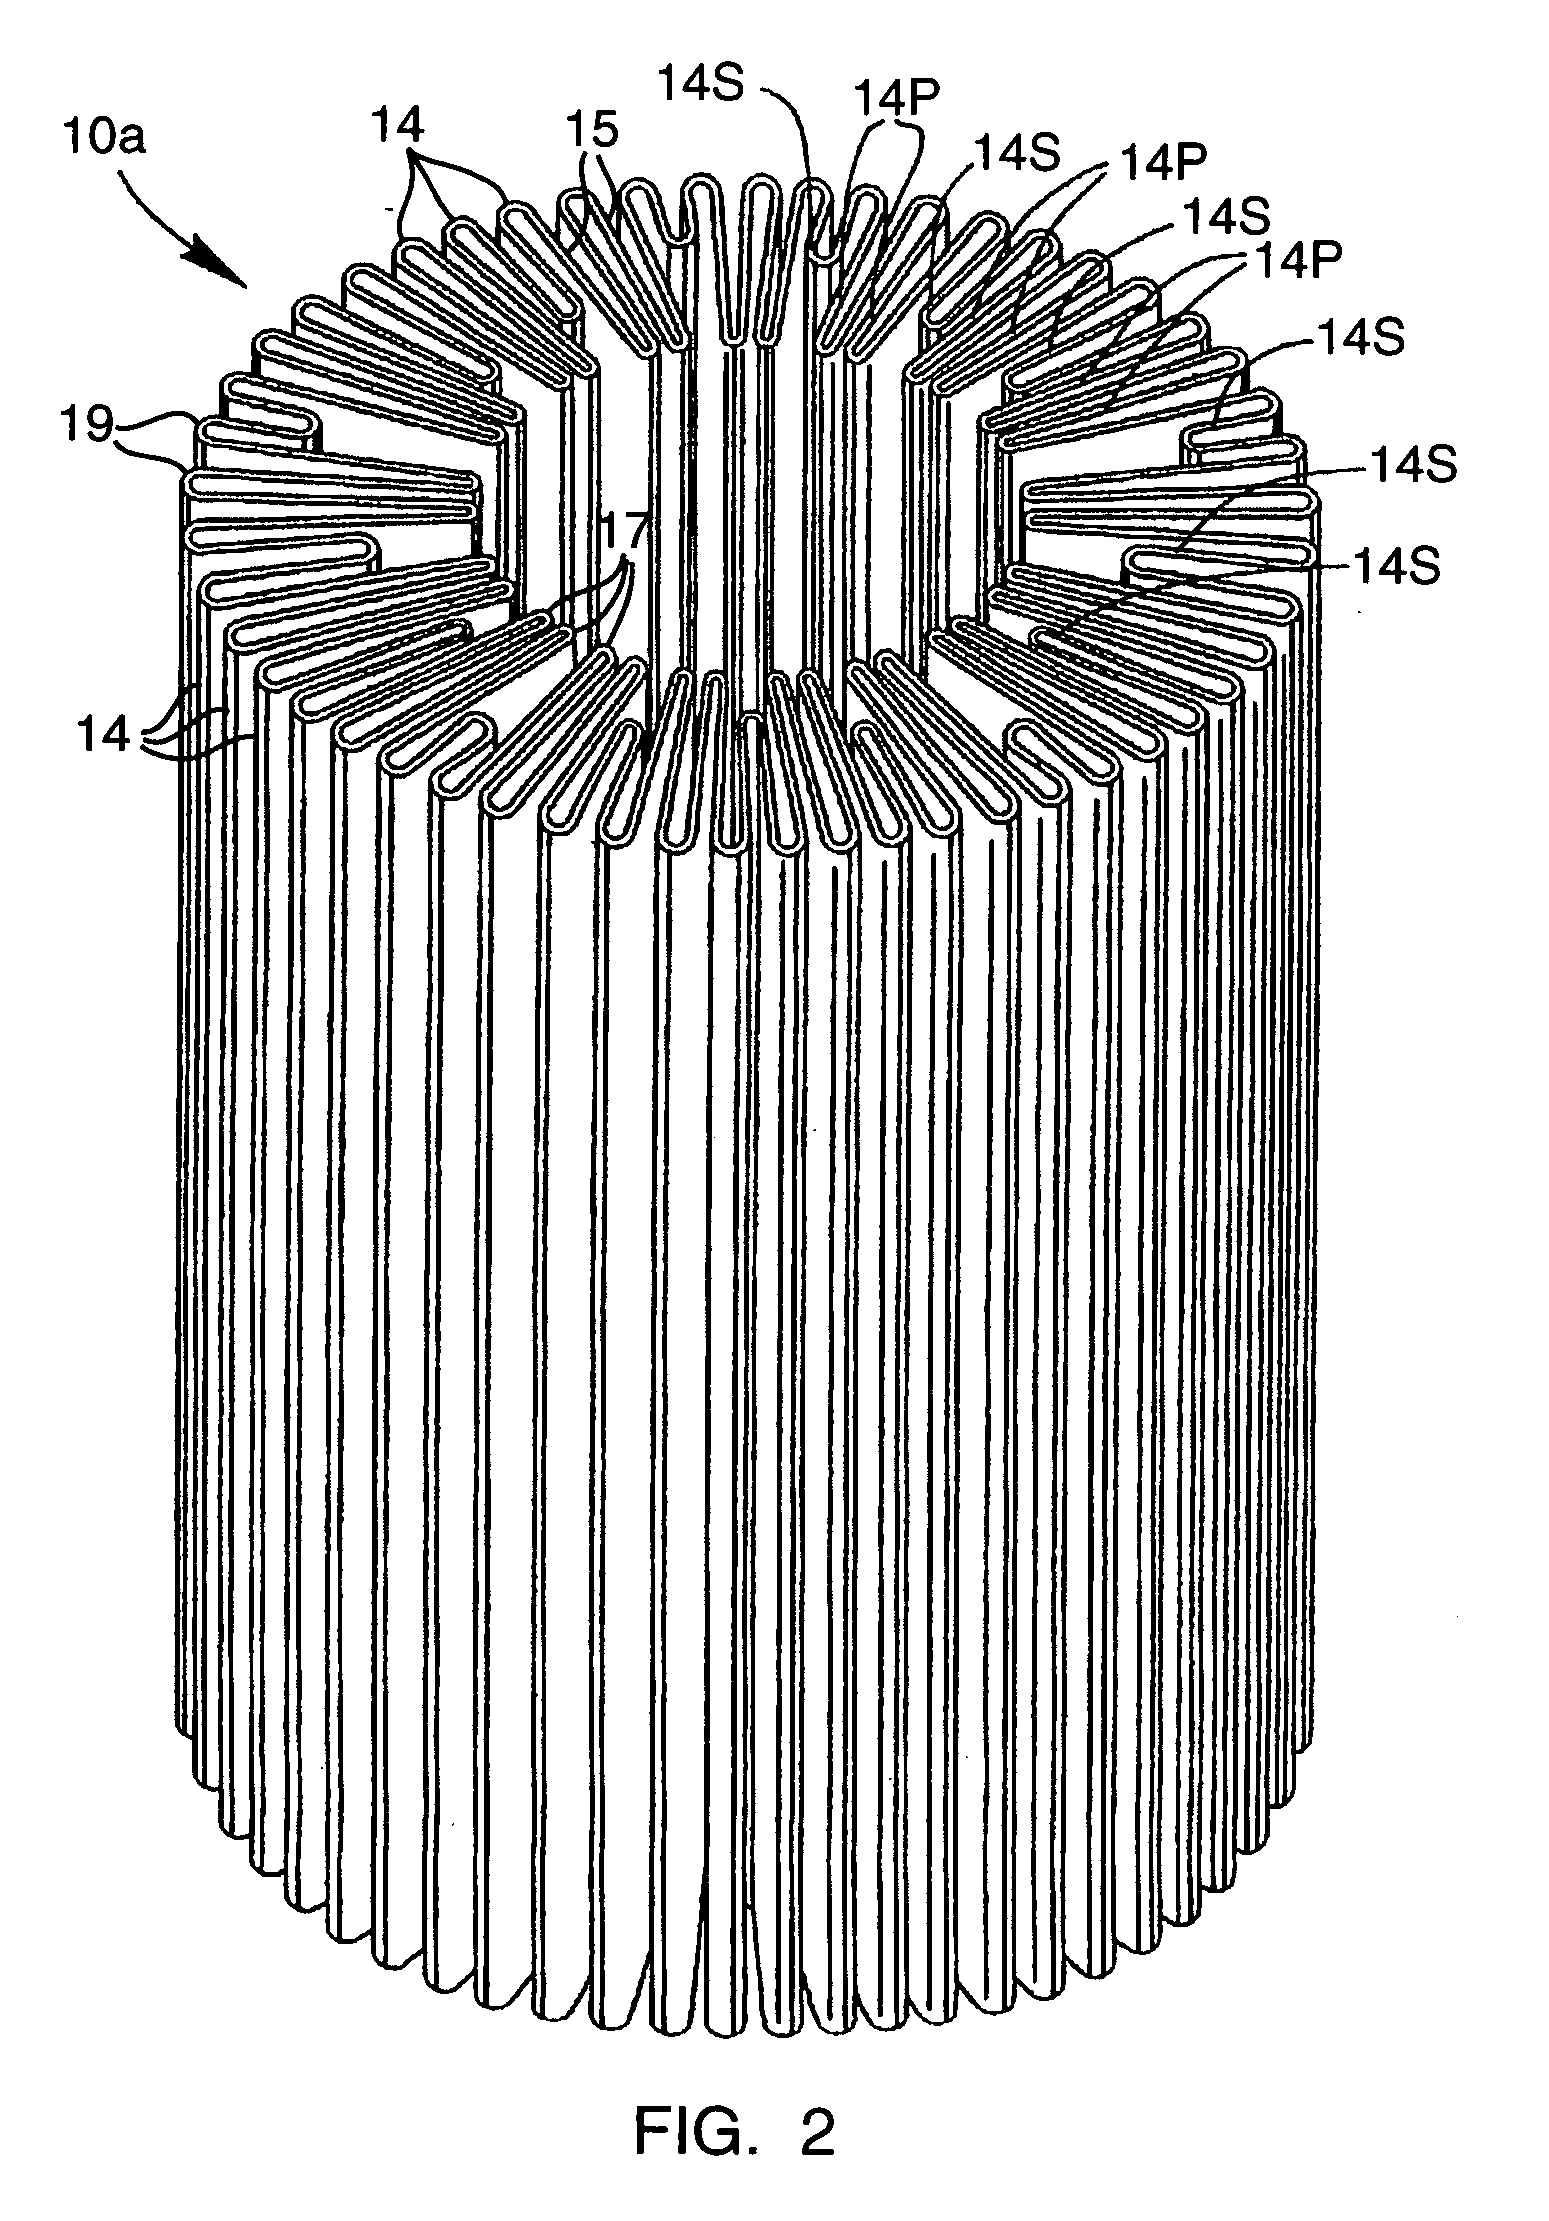 Pleated multi-layer filter media and cartridge